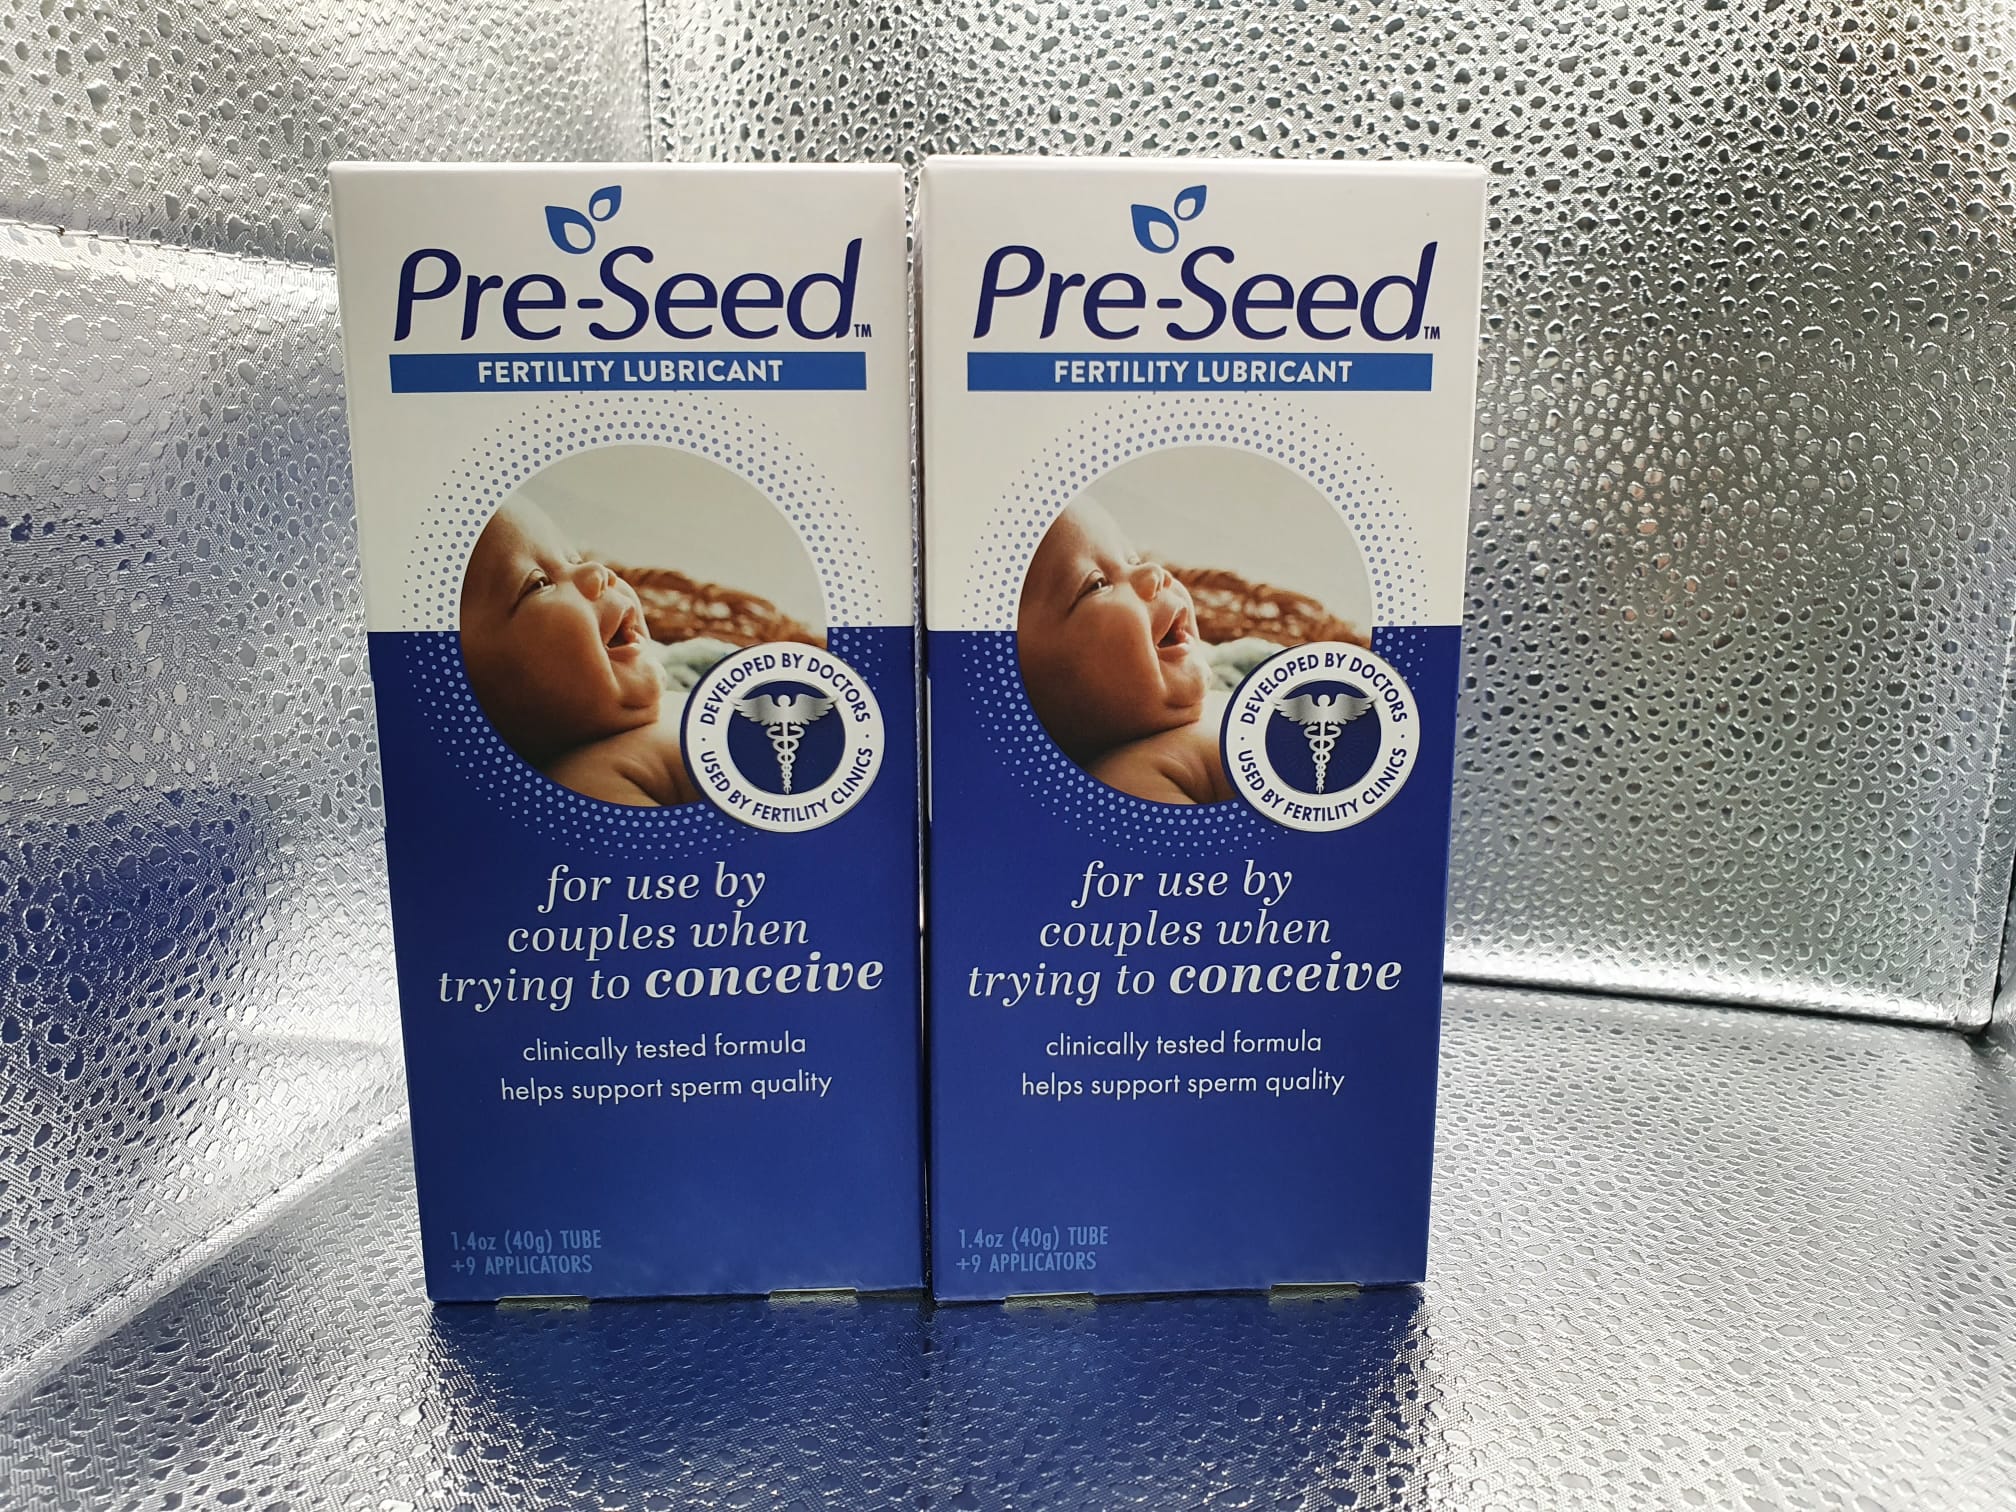 Pre-Seed Fertility Conception Friendly Lube Lubricant Plus 9